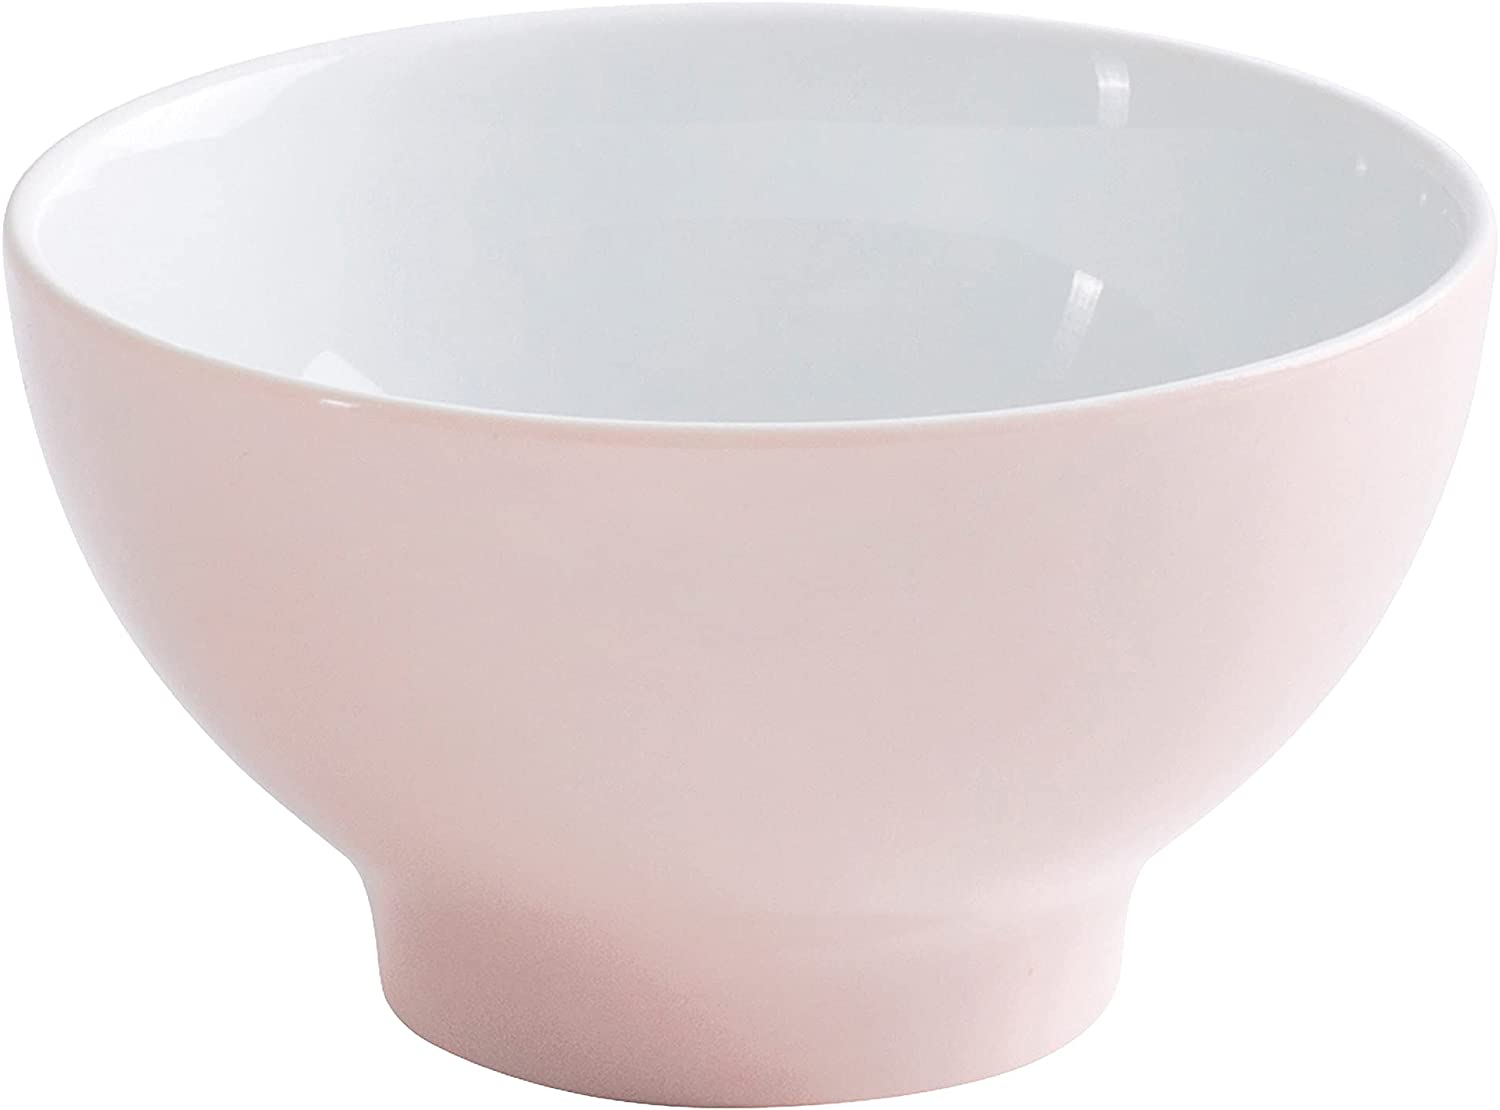 KAHLA Pronto Colore Bowl in Original Packaging